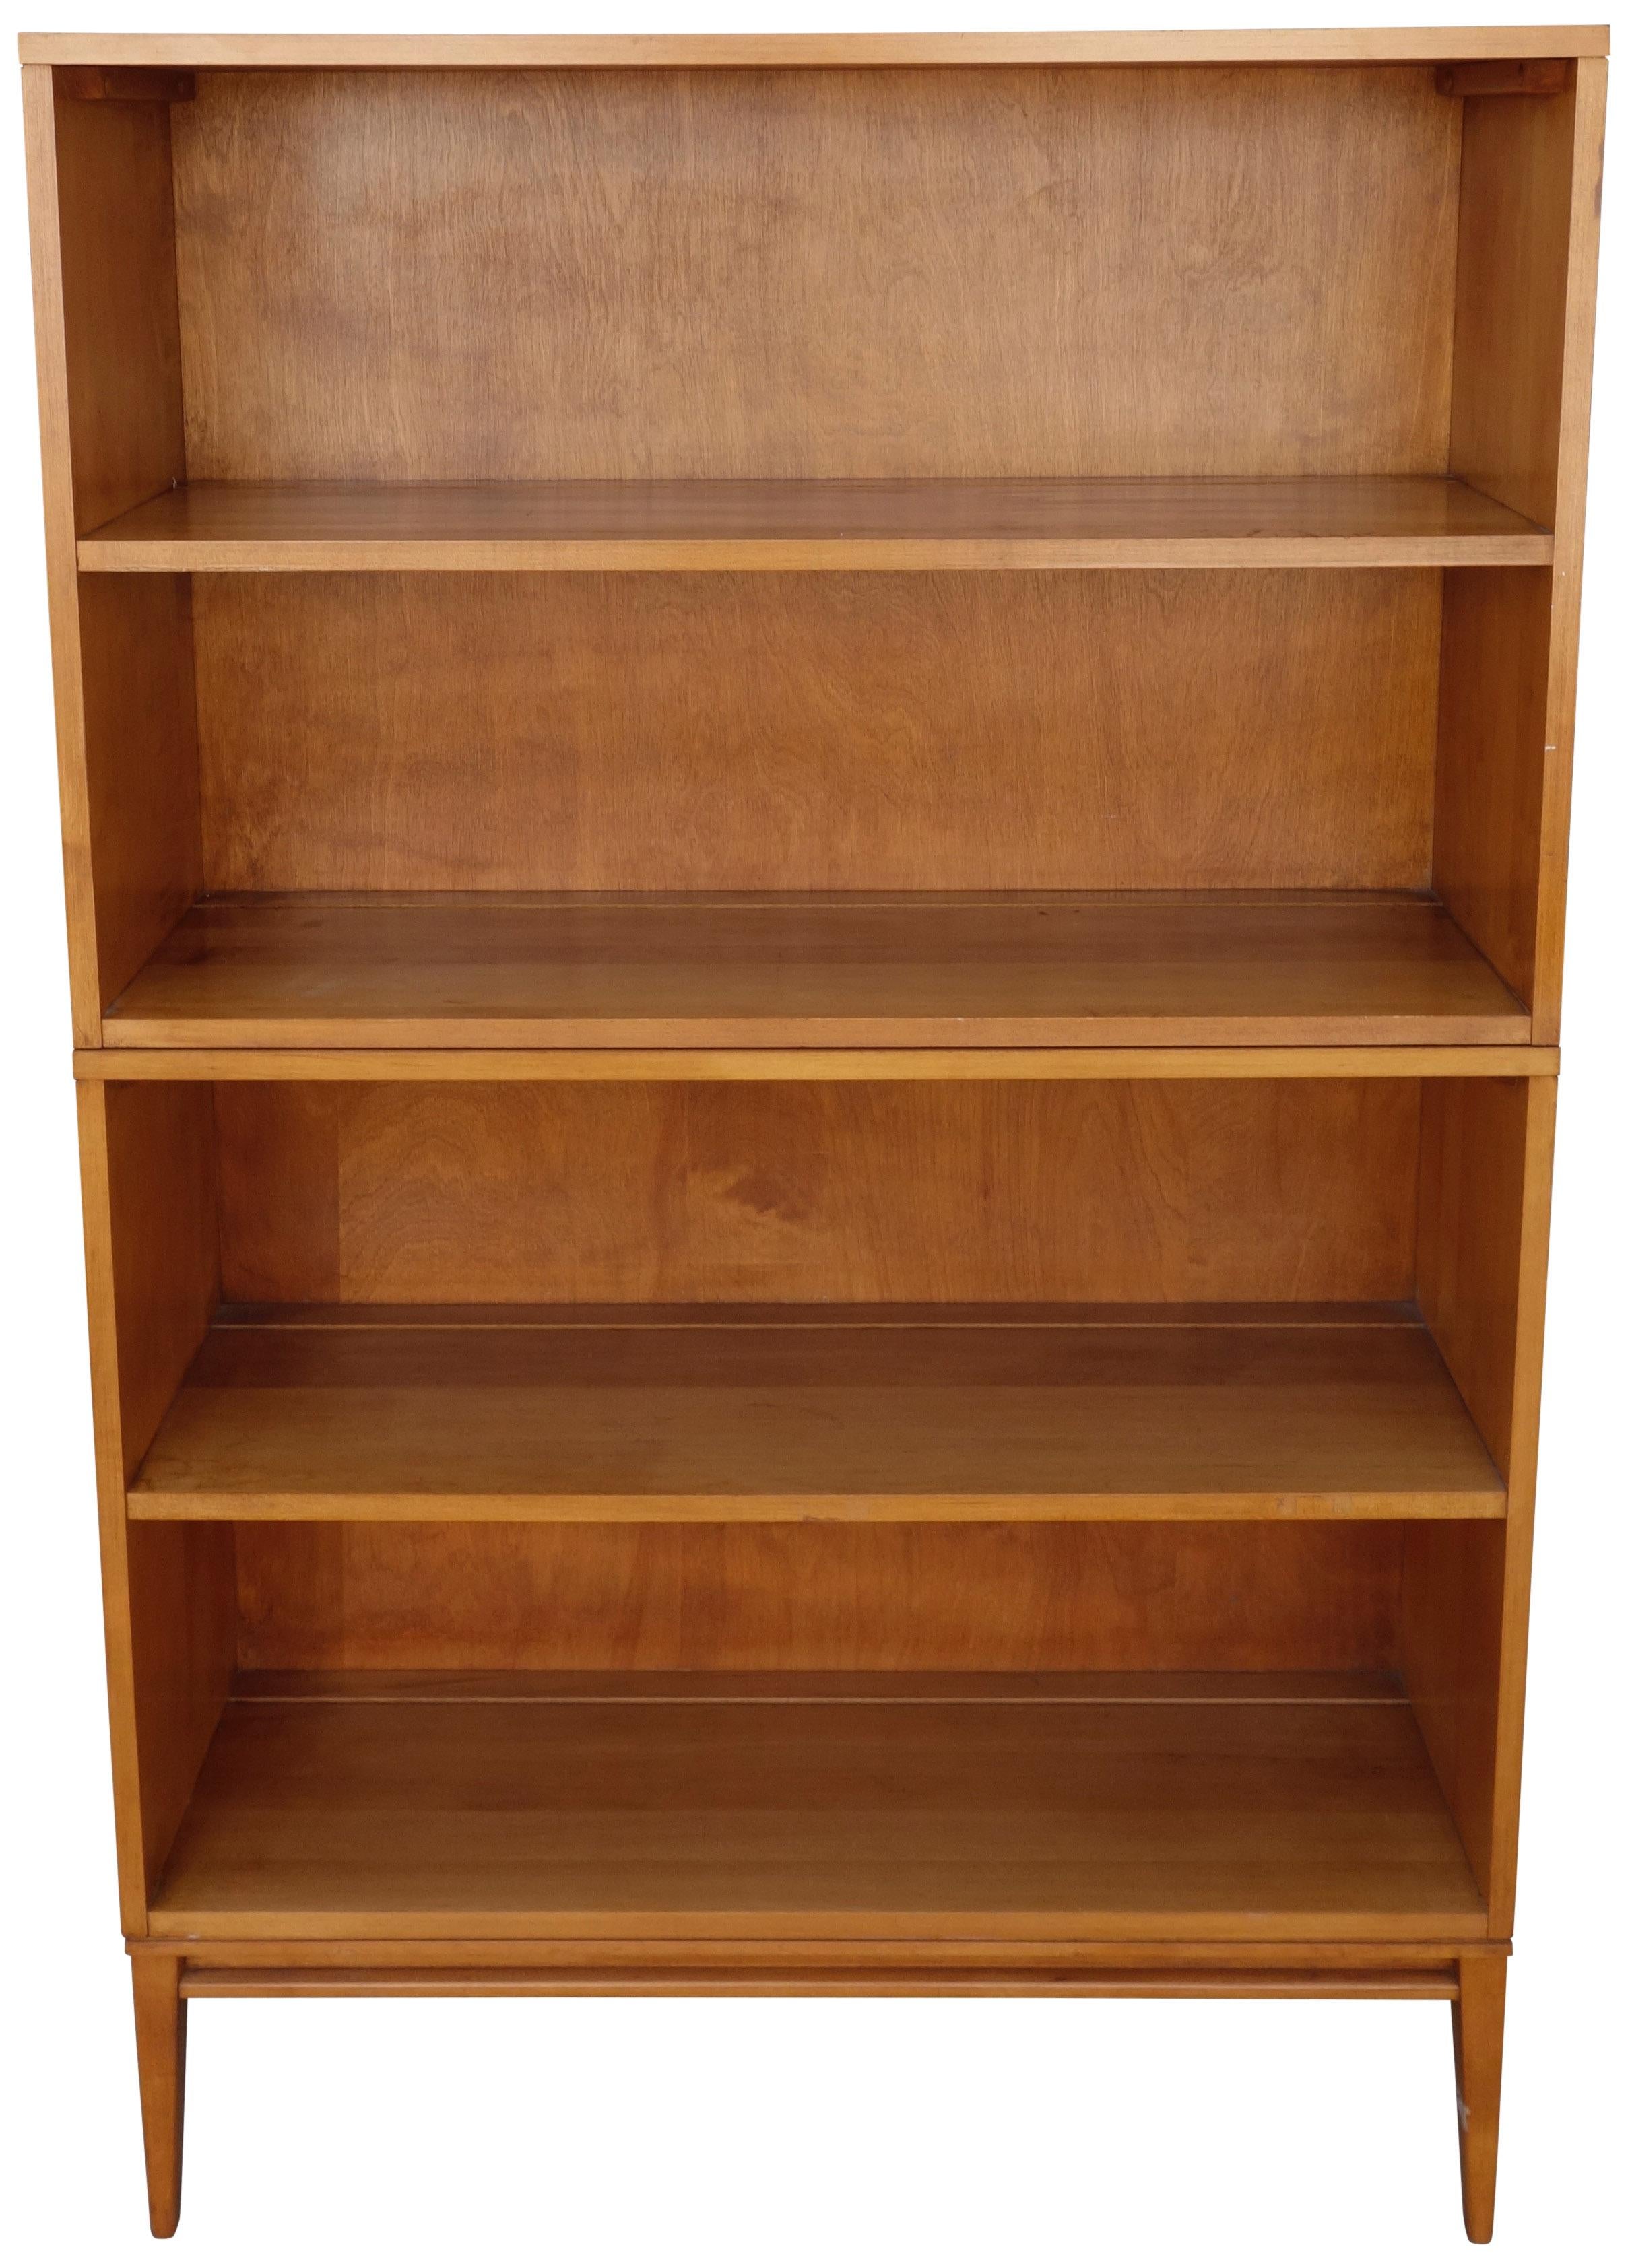 Vintage midcentury Paul McCobb double high bookcase #1516 tobacco maple finish wood base. Beautiful bookcase by Paul McCobb circa 1950s Planner Group, single shelf, solid maple with blonde Maple. Clean inside and out original vintage condition. Has